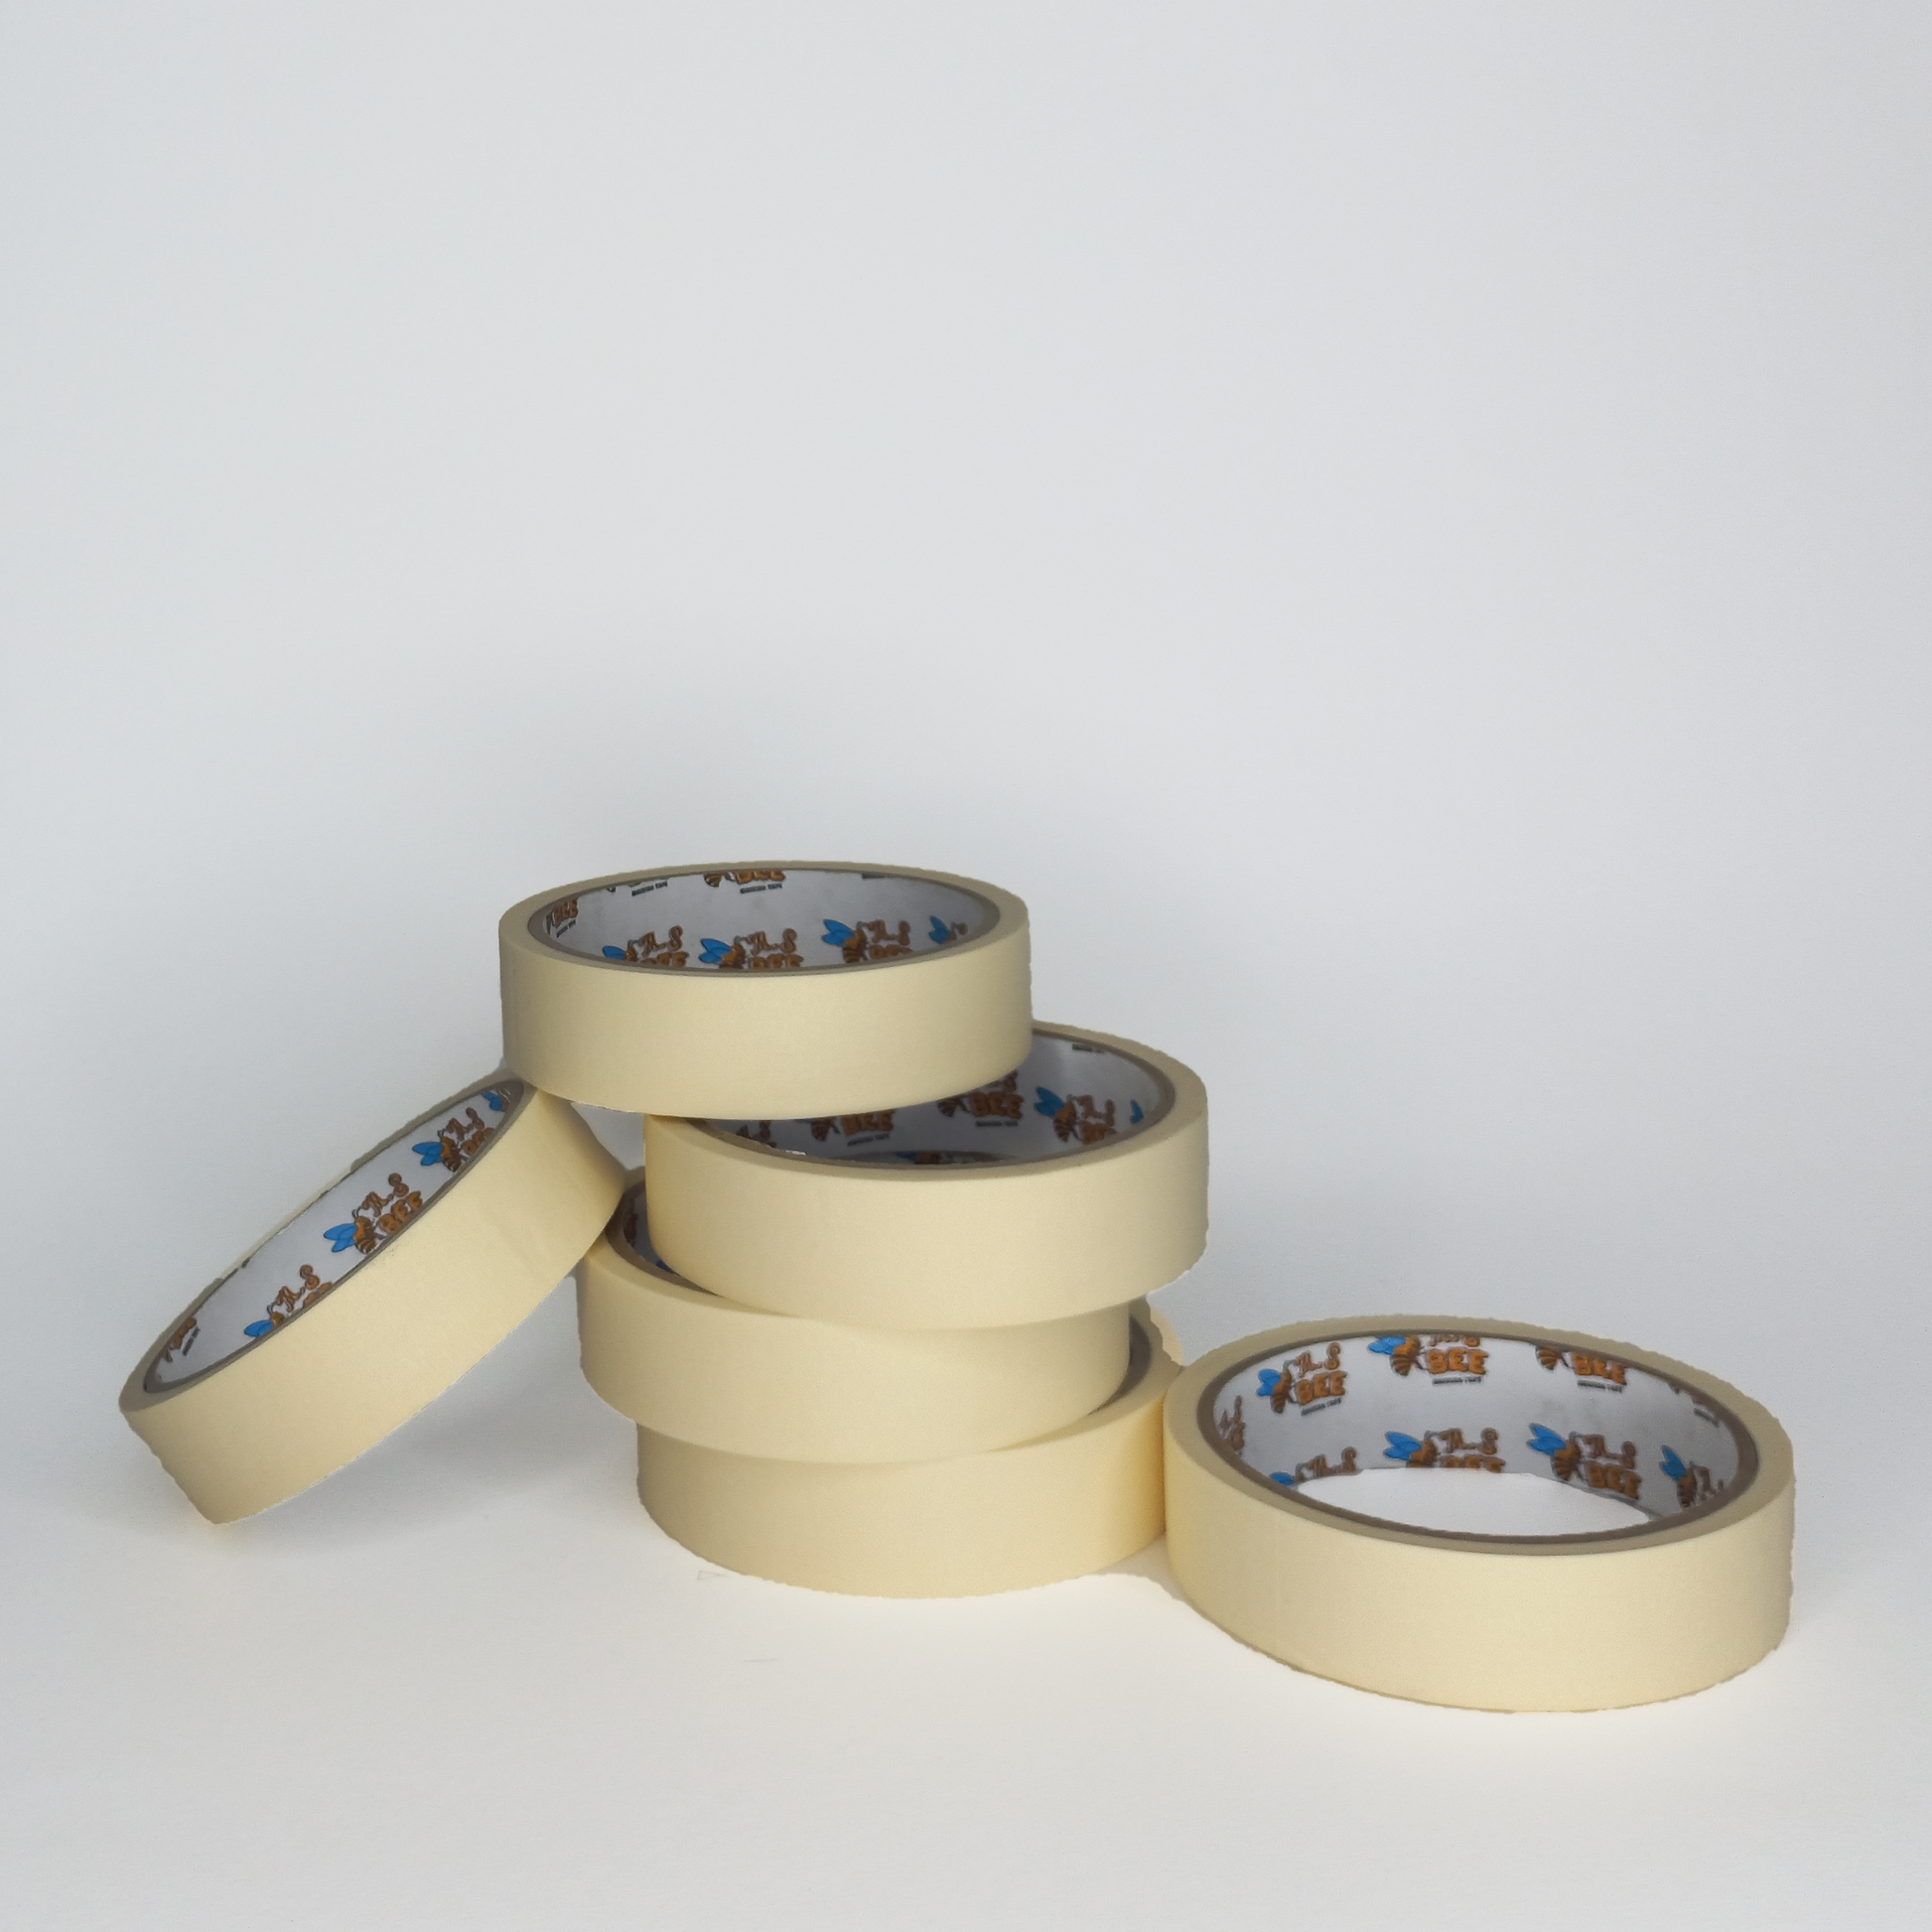 Product Images for JVCC Crepe Paper Masking Tape [Overstock]  (MT-02)